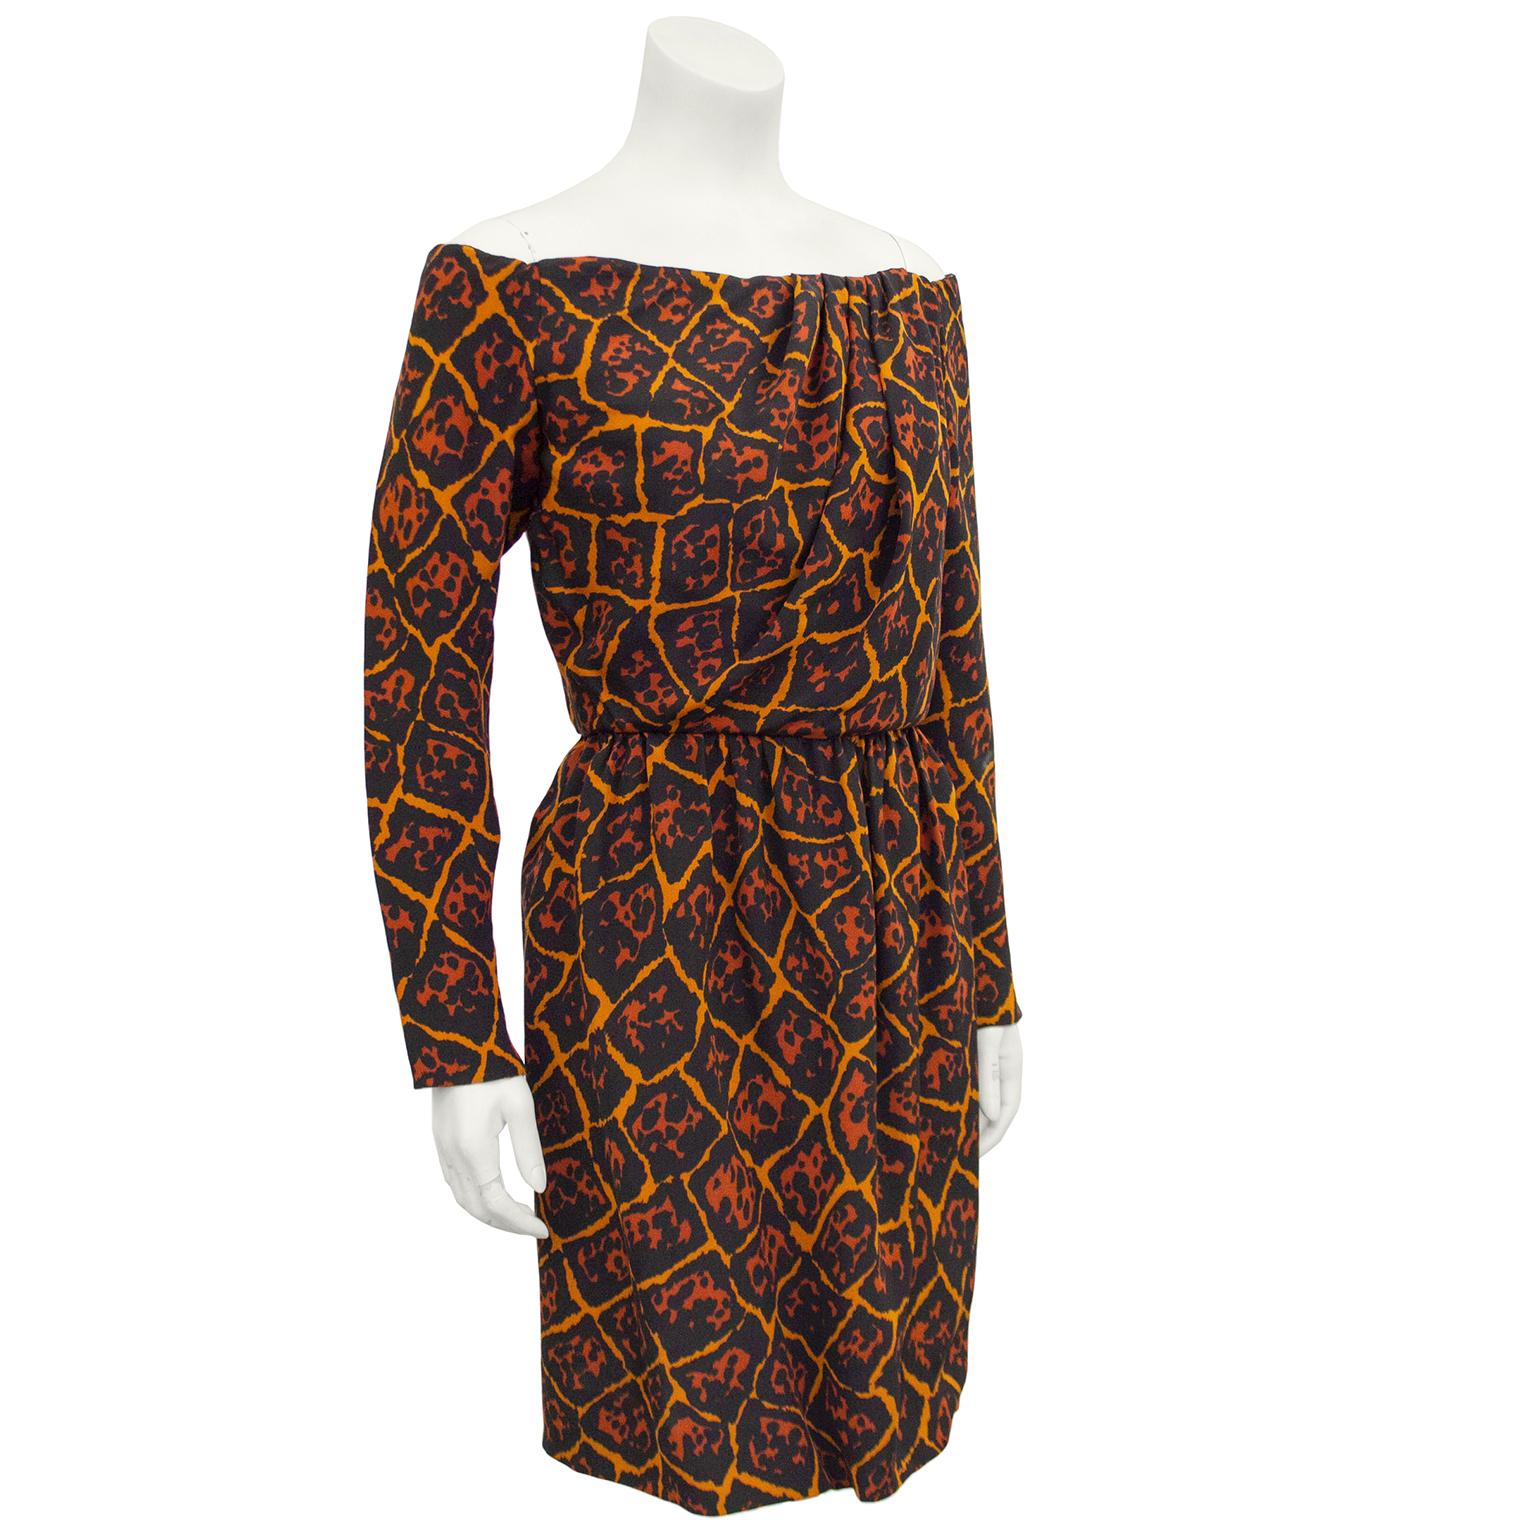 Yves Saint Laurent early 1980s orange, black and brick color allover leopard/giraffe fusion print crepe dress. Interior boning and corset with snap closures on left side when wearing. Off the shoulder & long sleeves with zippers at cuffs. Ruching